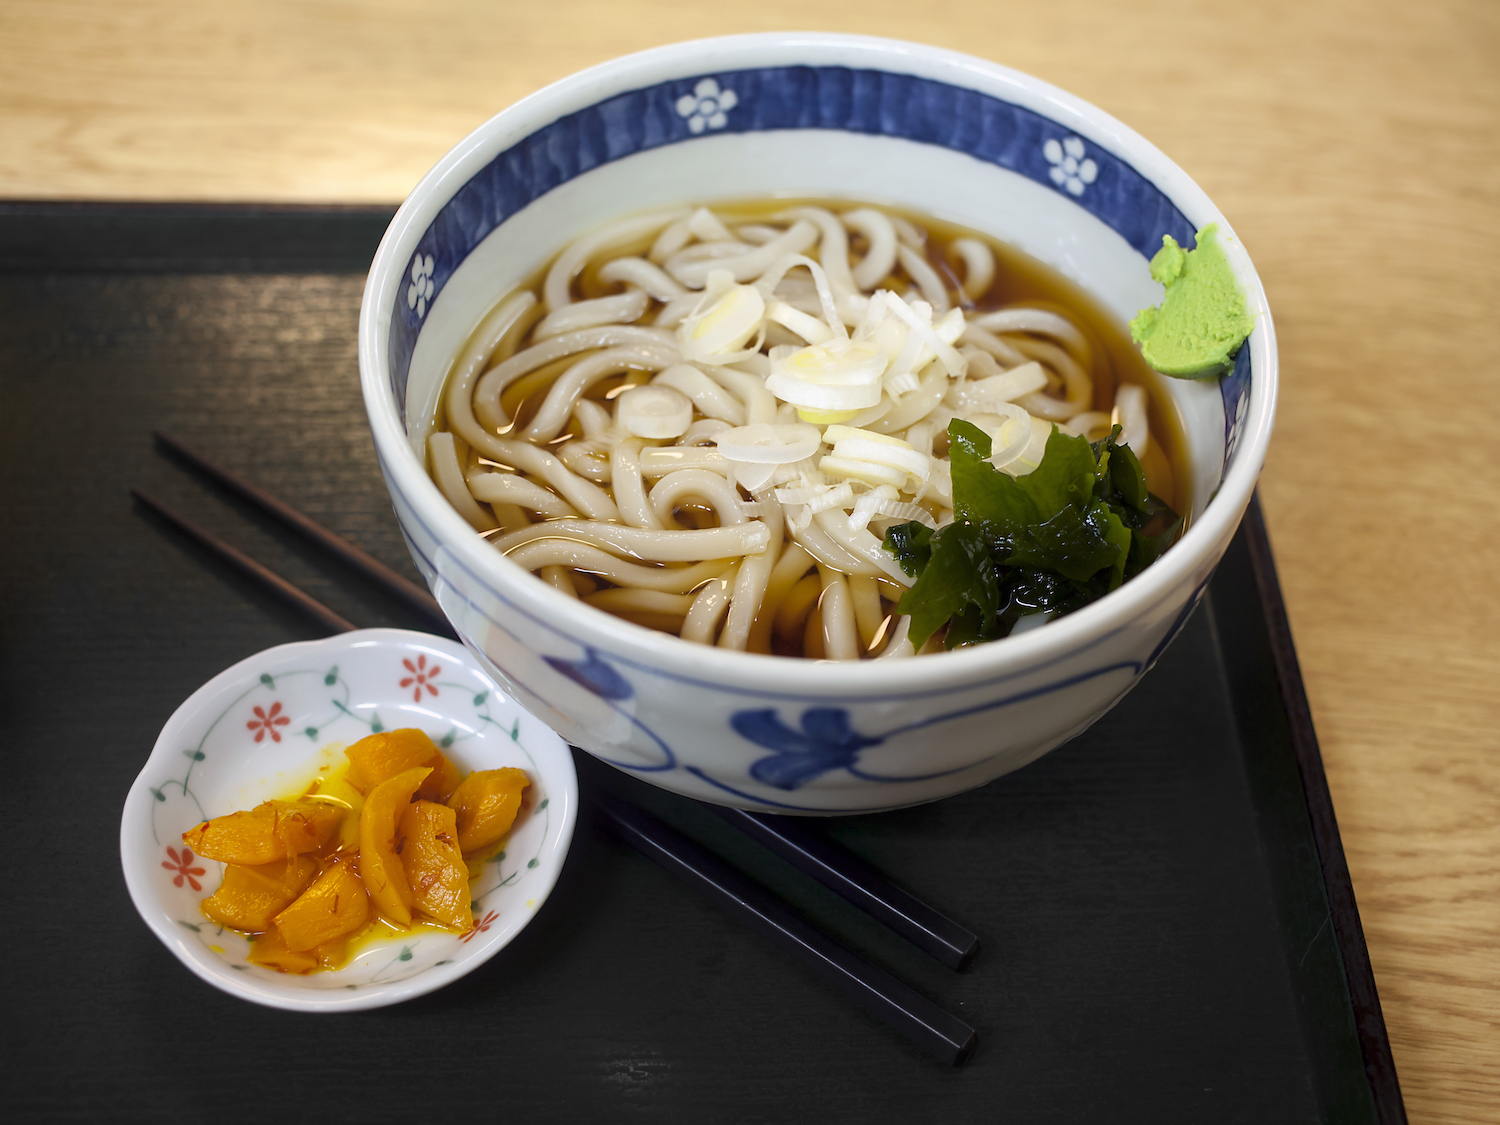 Udon served in bowl with takuan aside on serving tray